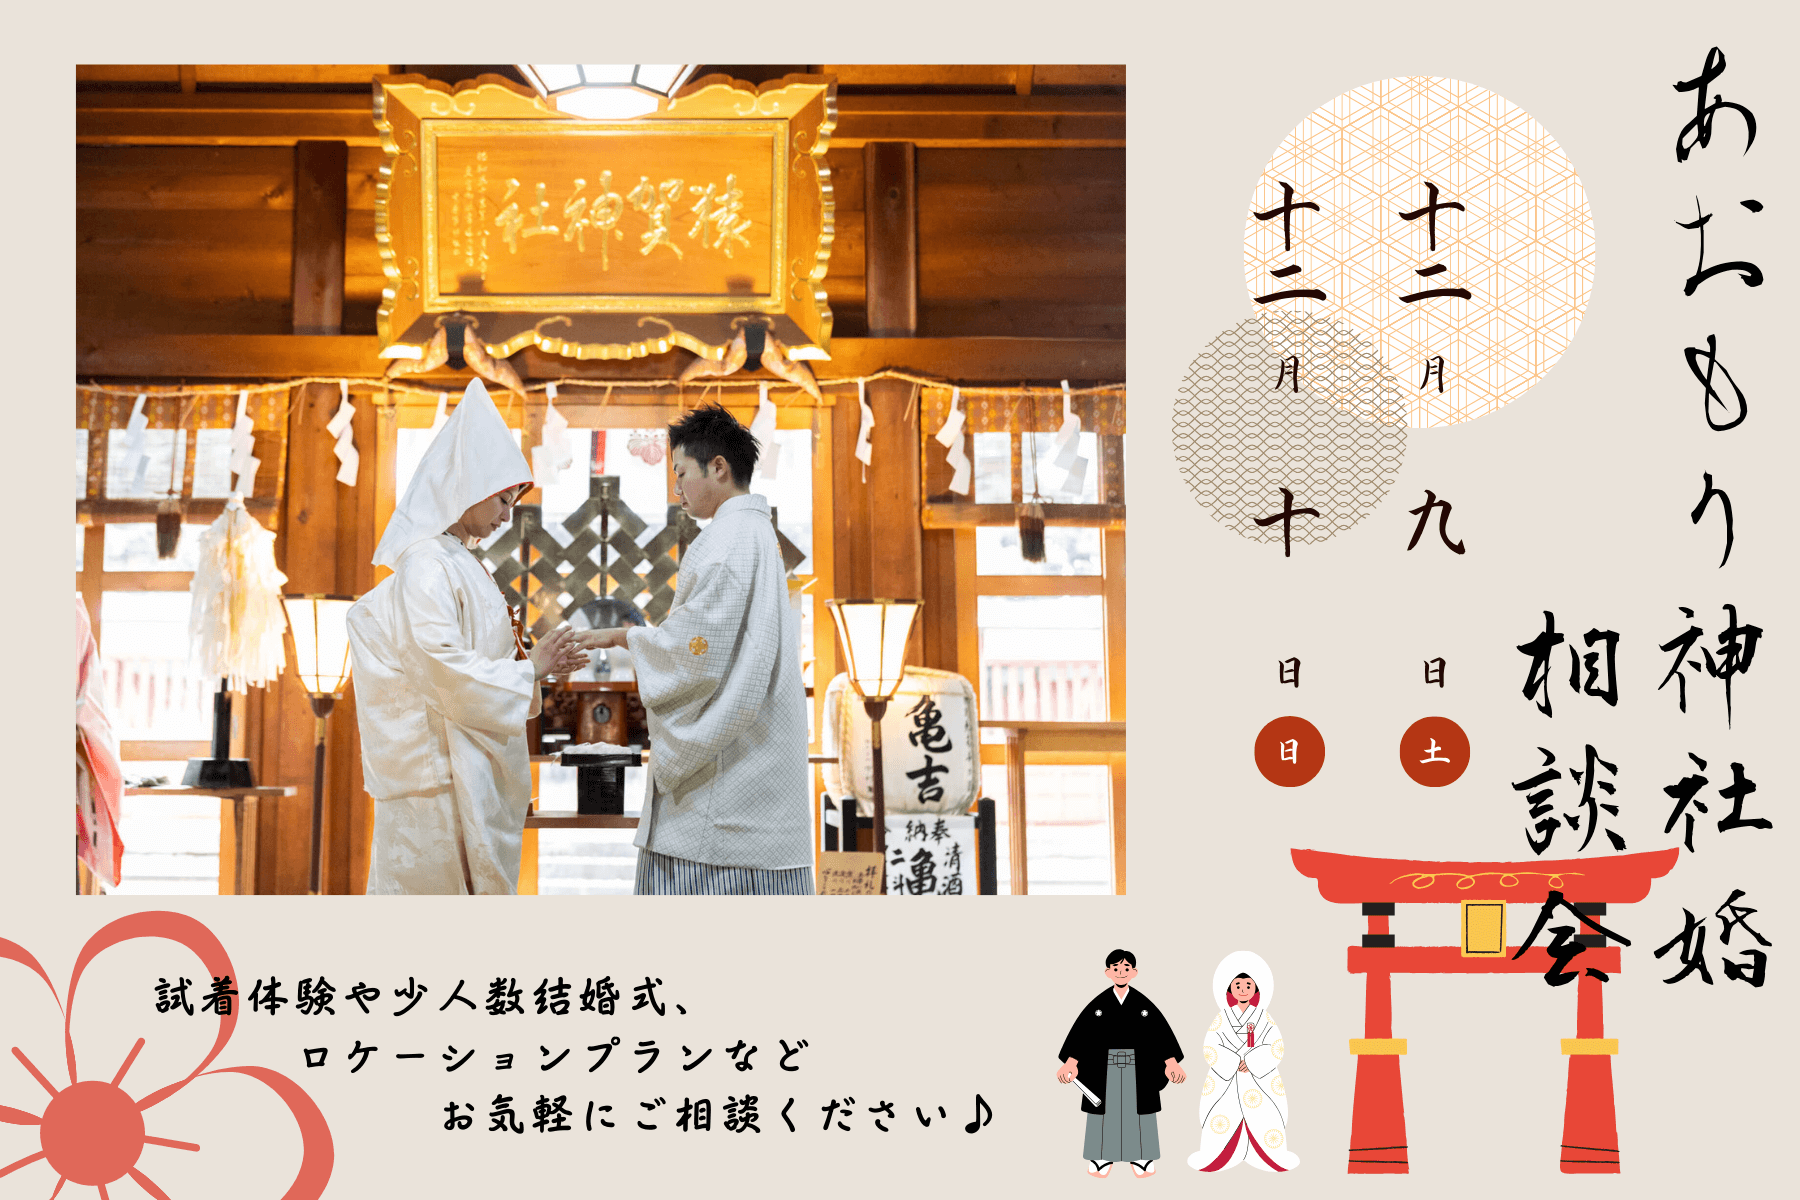 Featured image for “✧₊⁎⁺˳✧12/9(土),12/10(日)あおもり神社婚相談会✧₊⁎⁺˳✧”